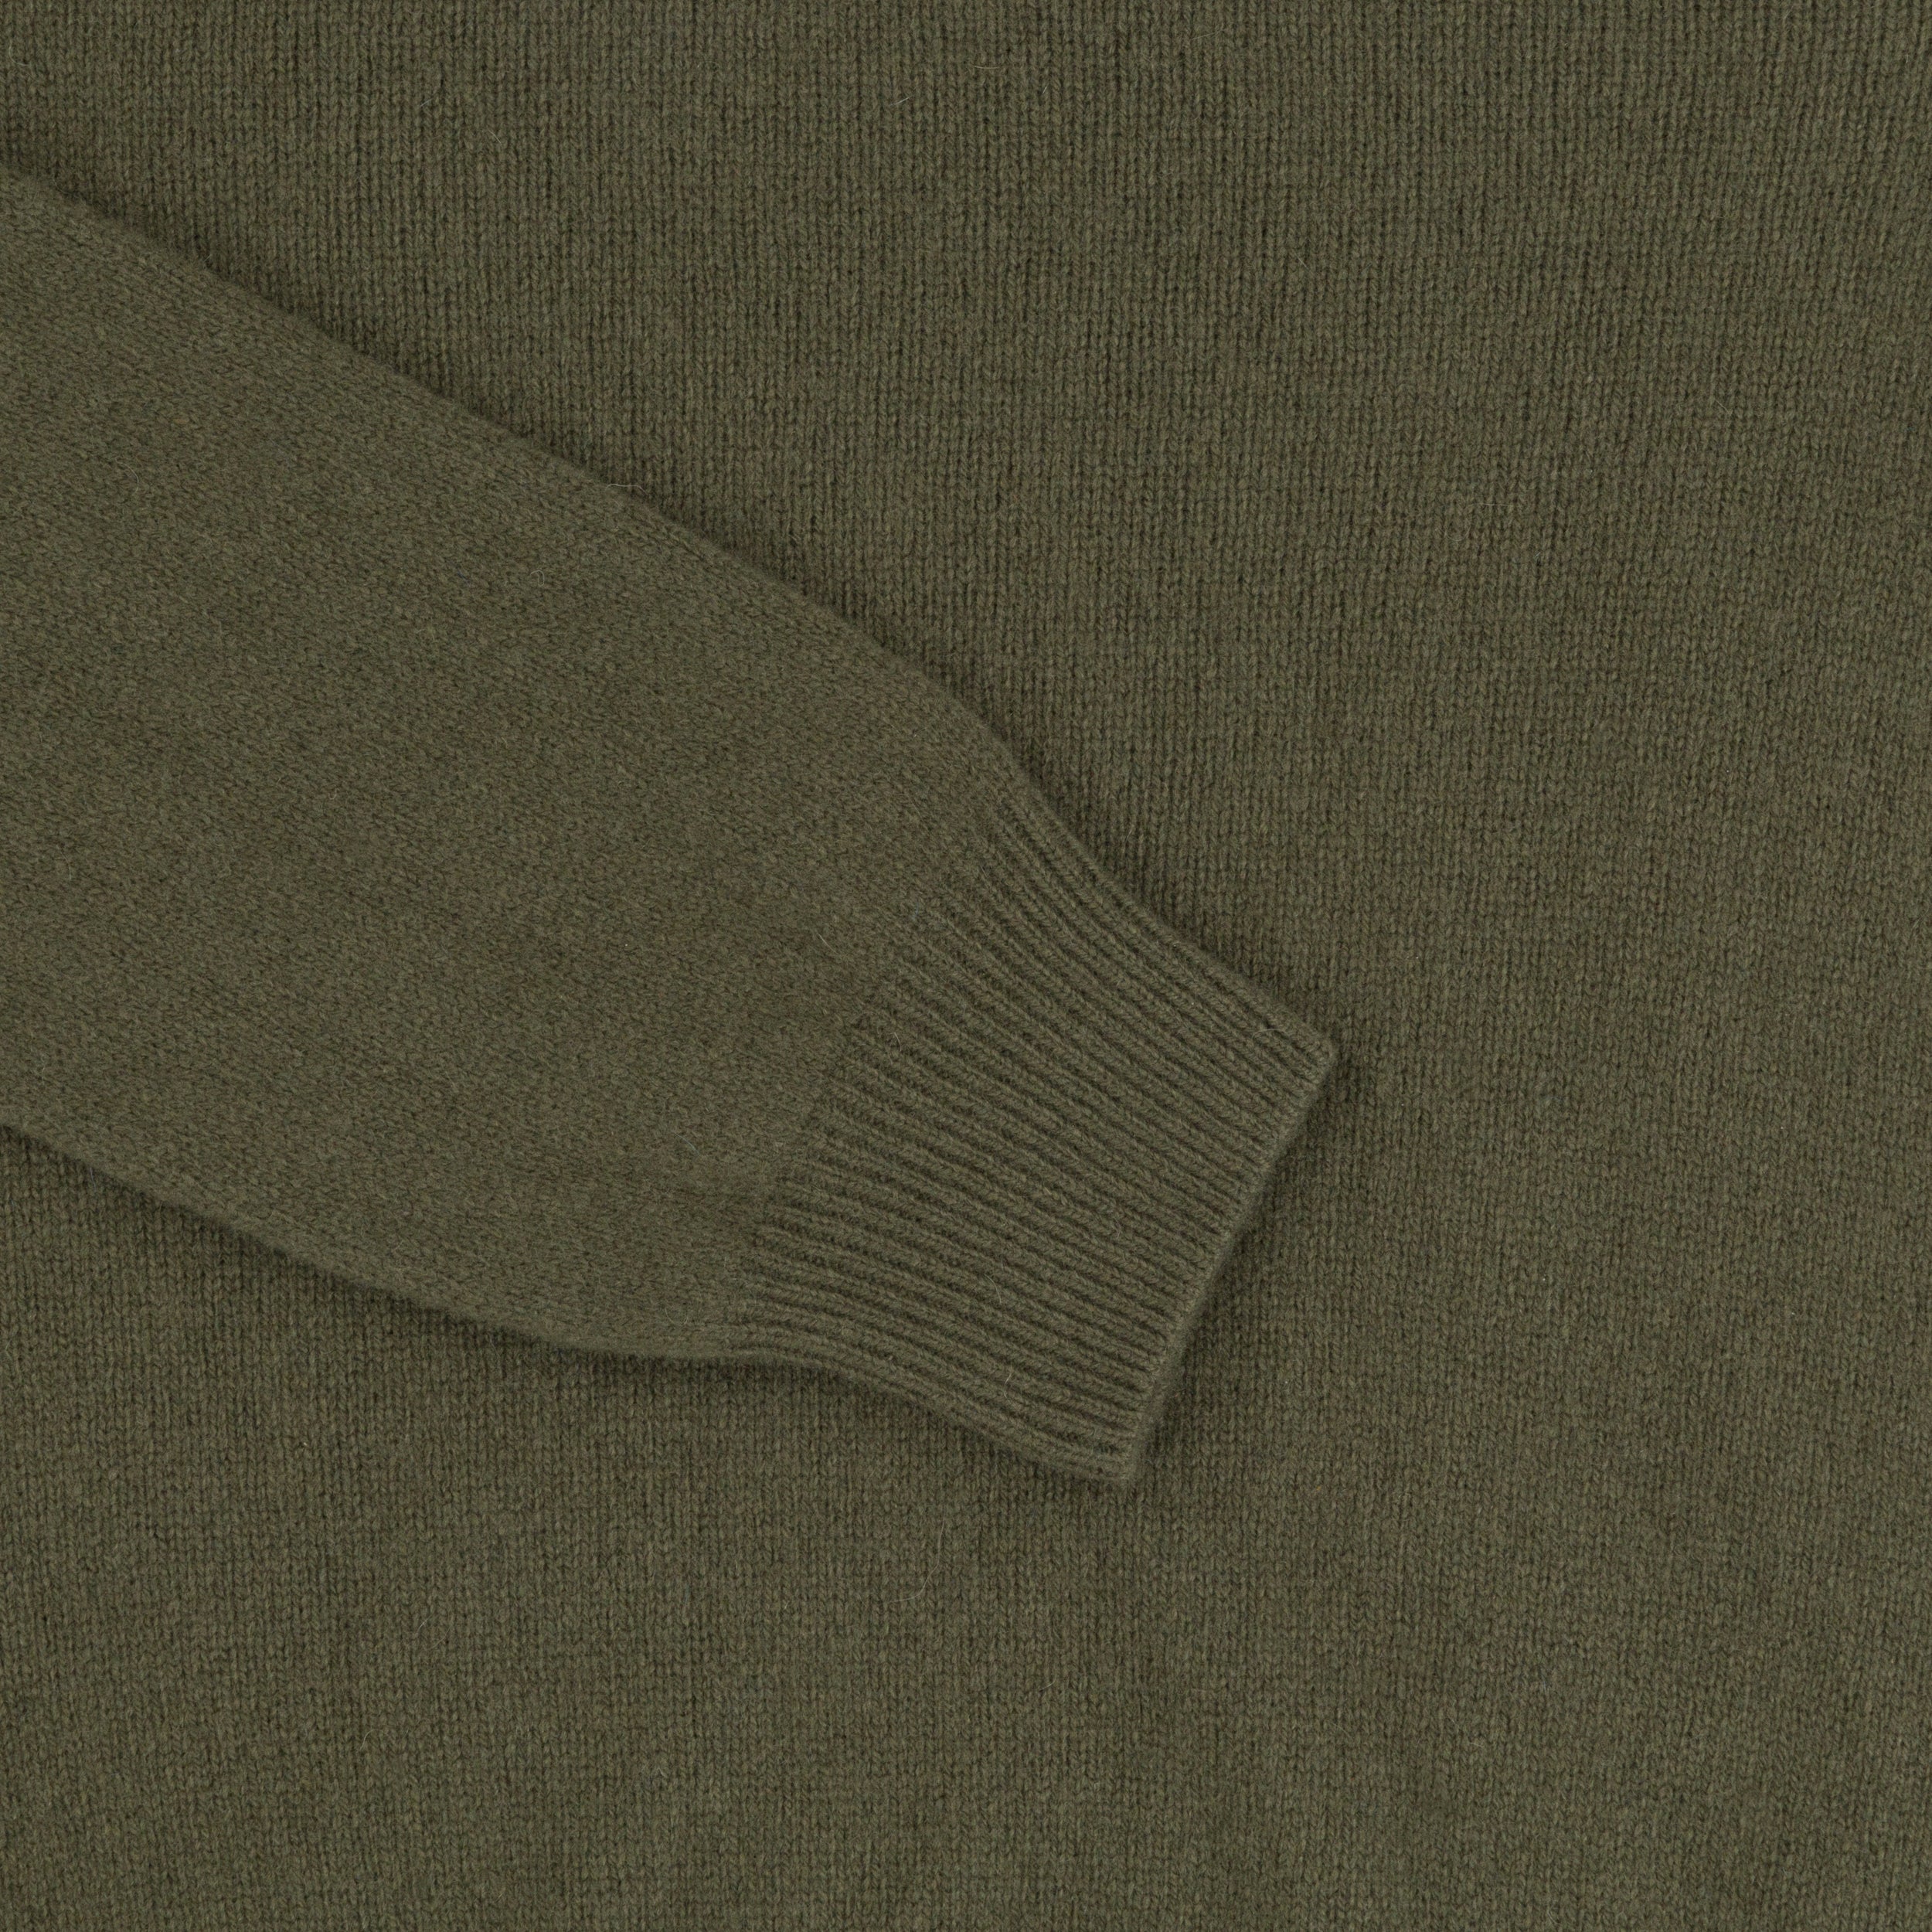 Carrier Company Hand Cashmere and Merino Supersoft Roll Neck Jumper in Olive